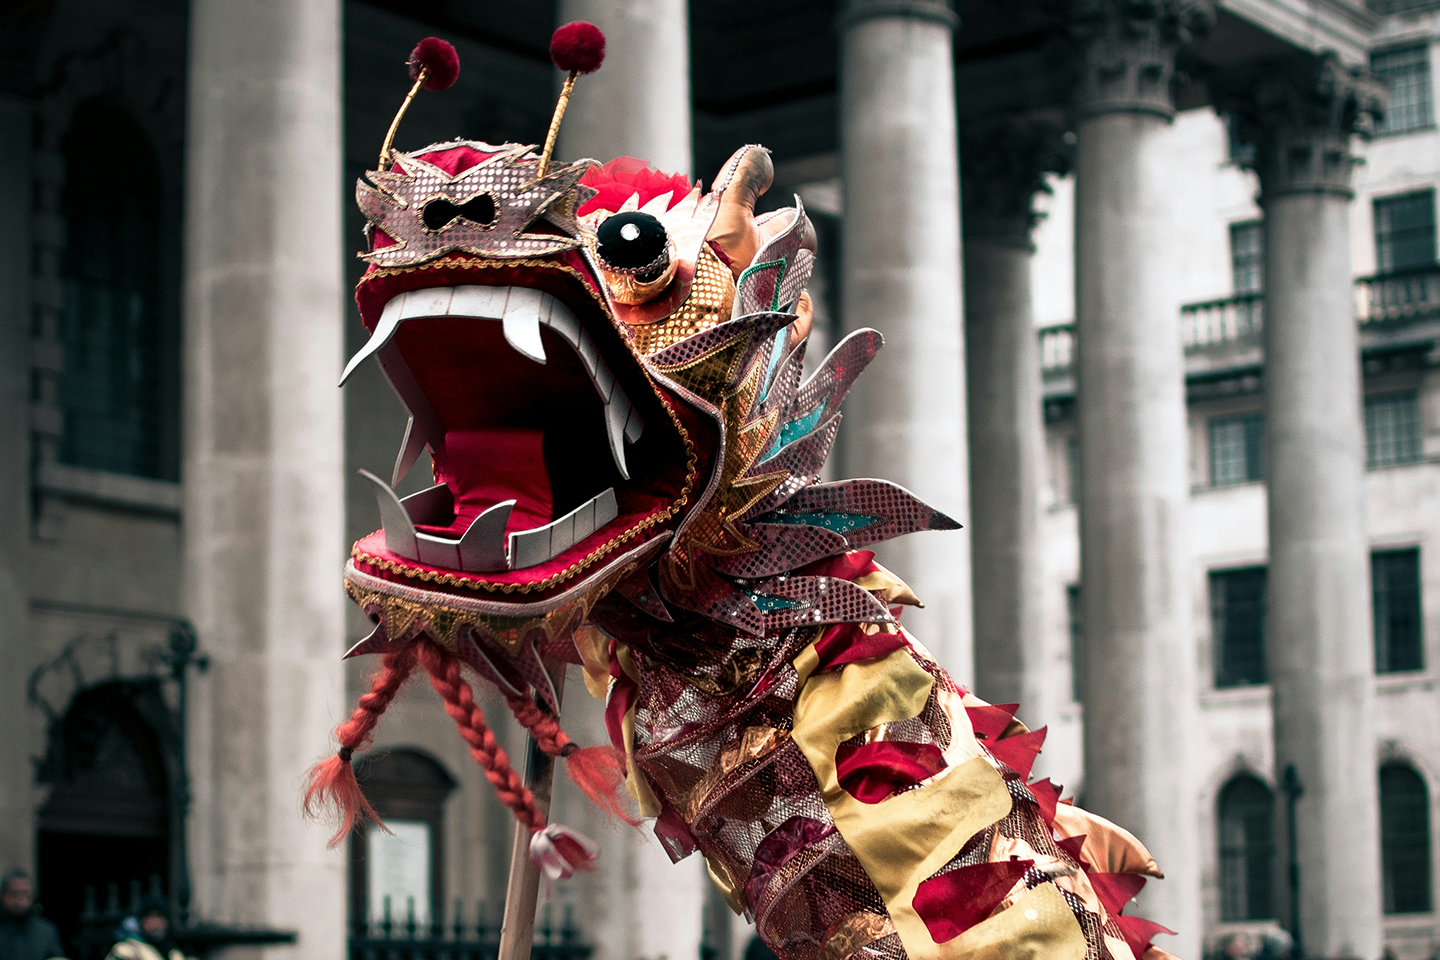 Chinese dragon parade through the streets of London. Embracing the Year of the Dragon